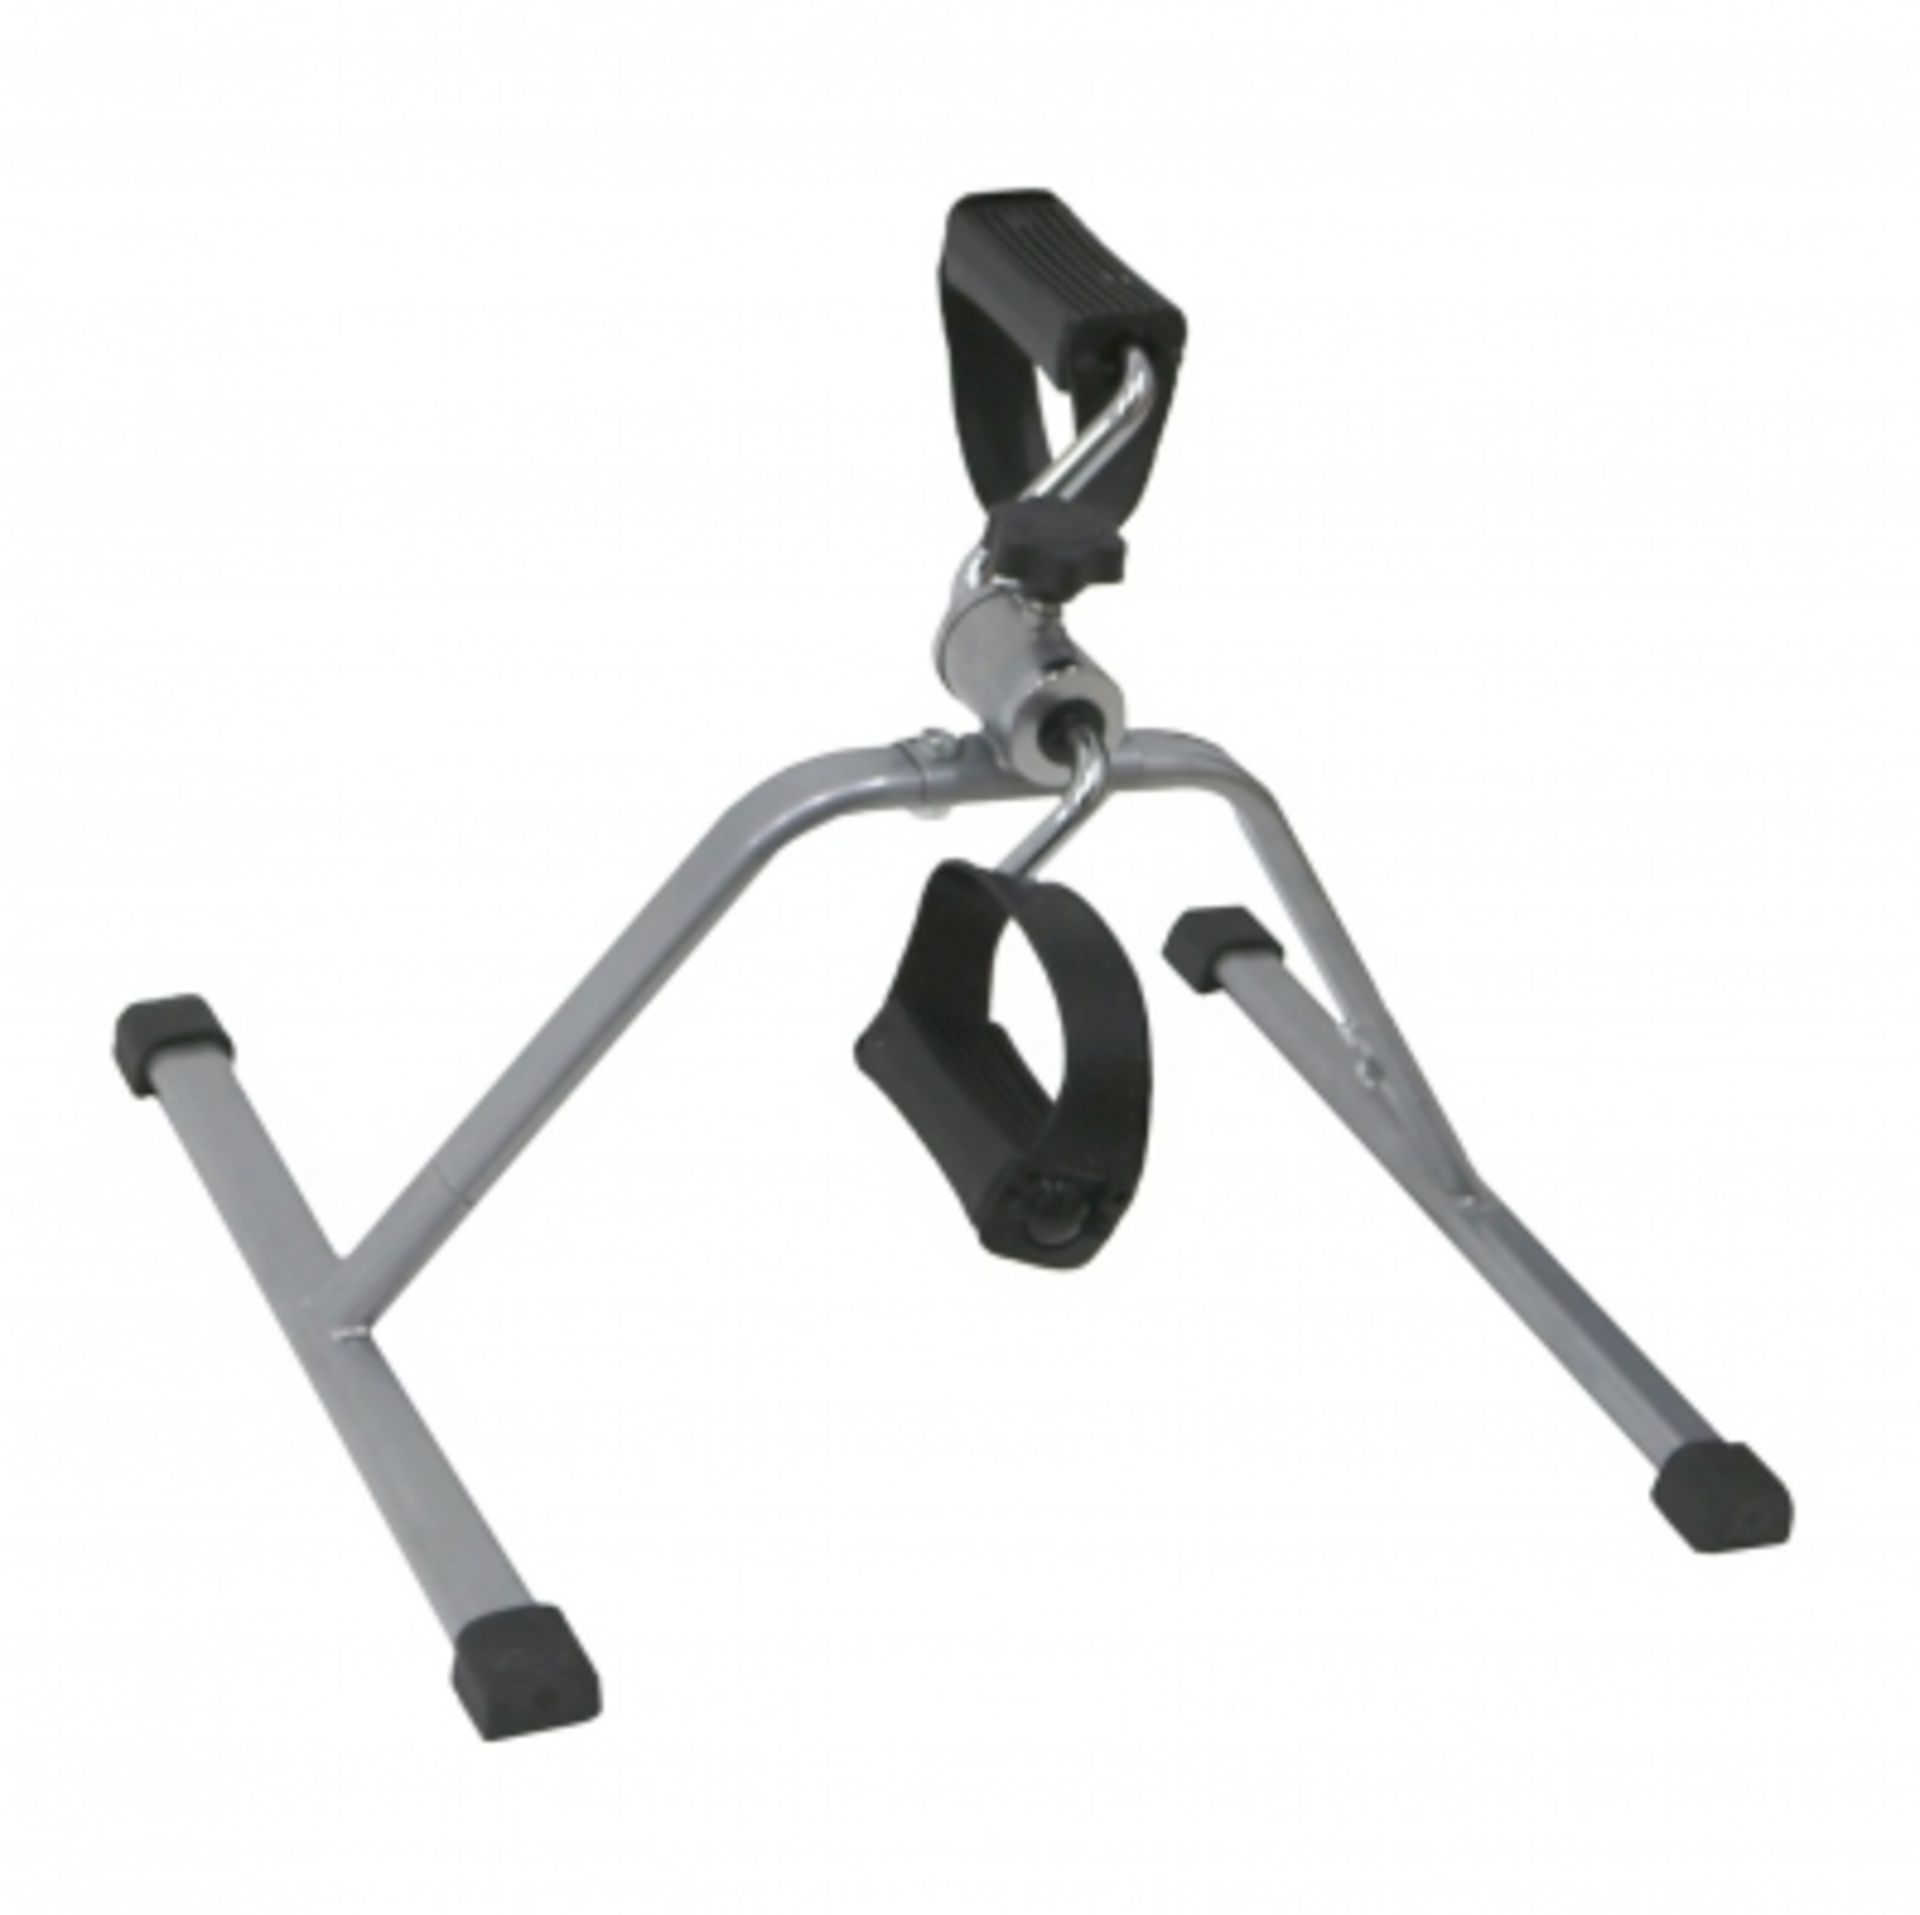 (RU29) Exercise Bike / Leg Exerciser Exercise Your Legs From The Comfort Of Your Chair, One...